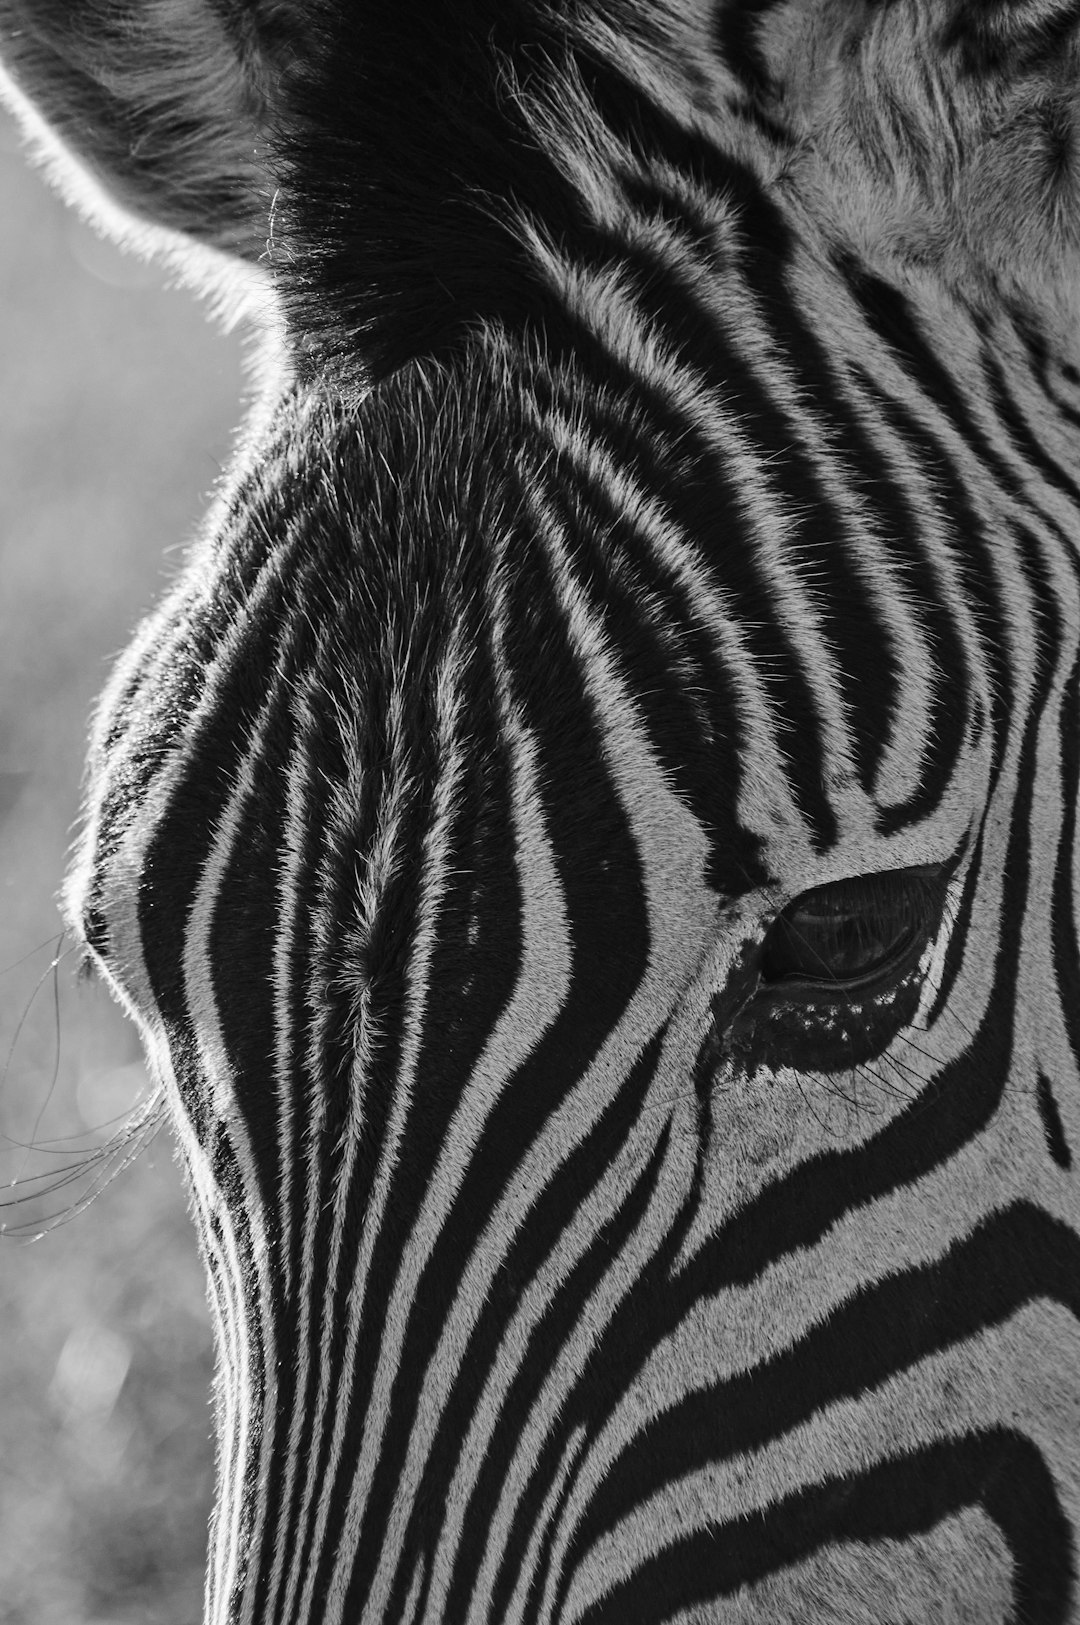 zebra in close up photography